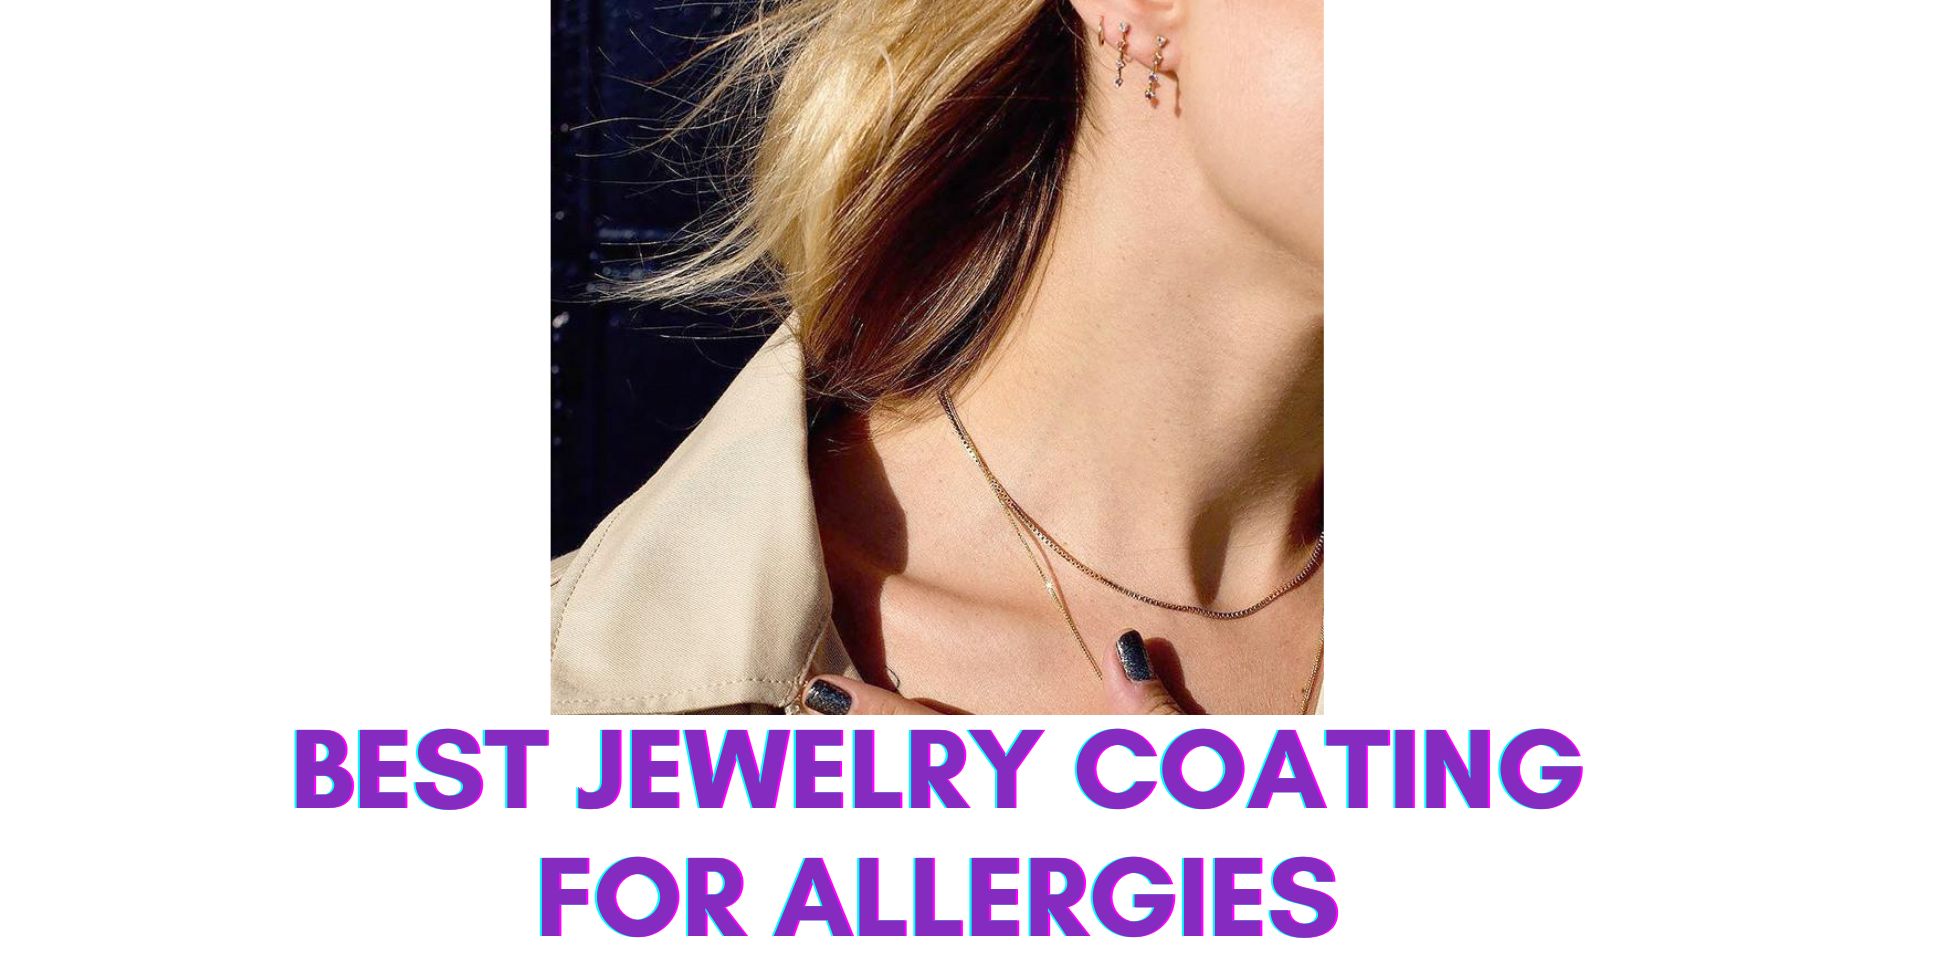 Best Jewelry Coating for Allergies